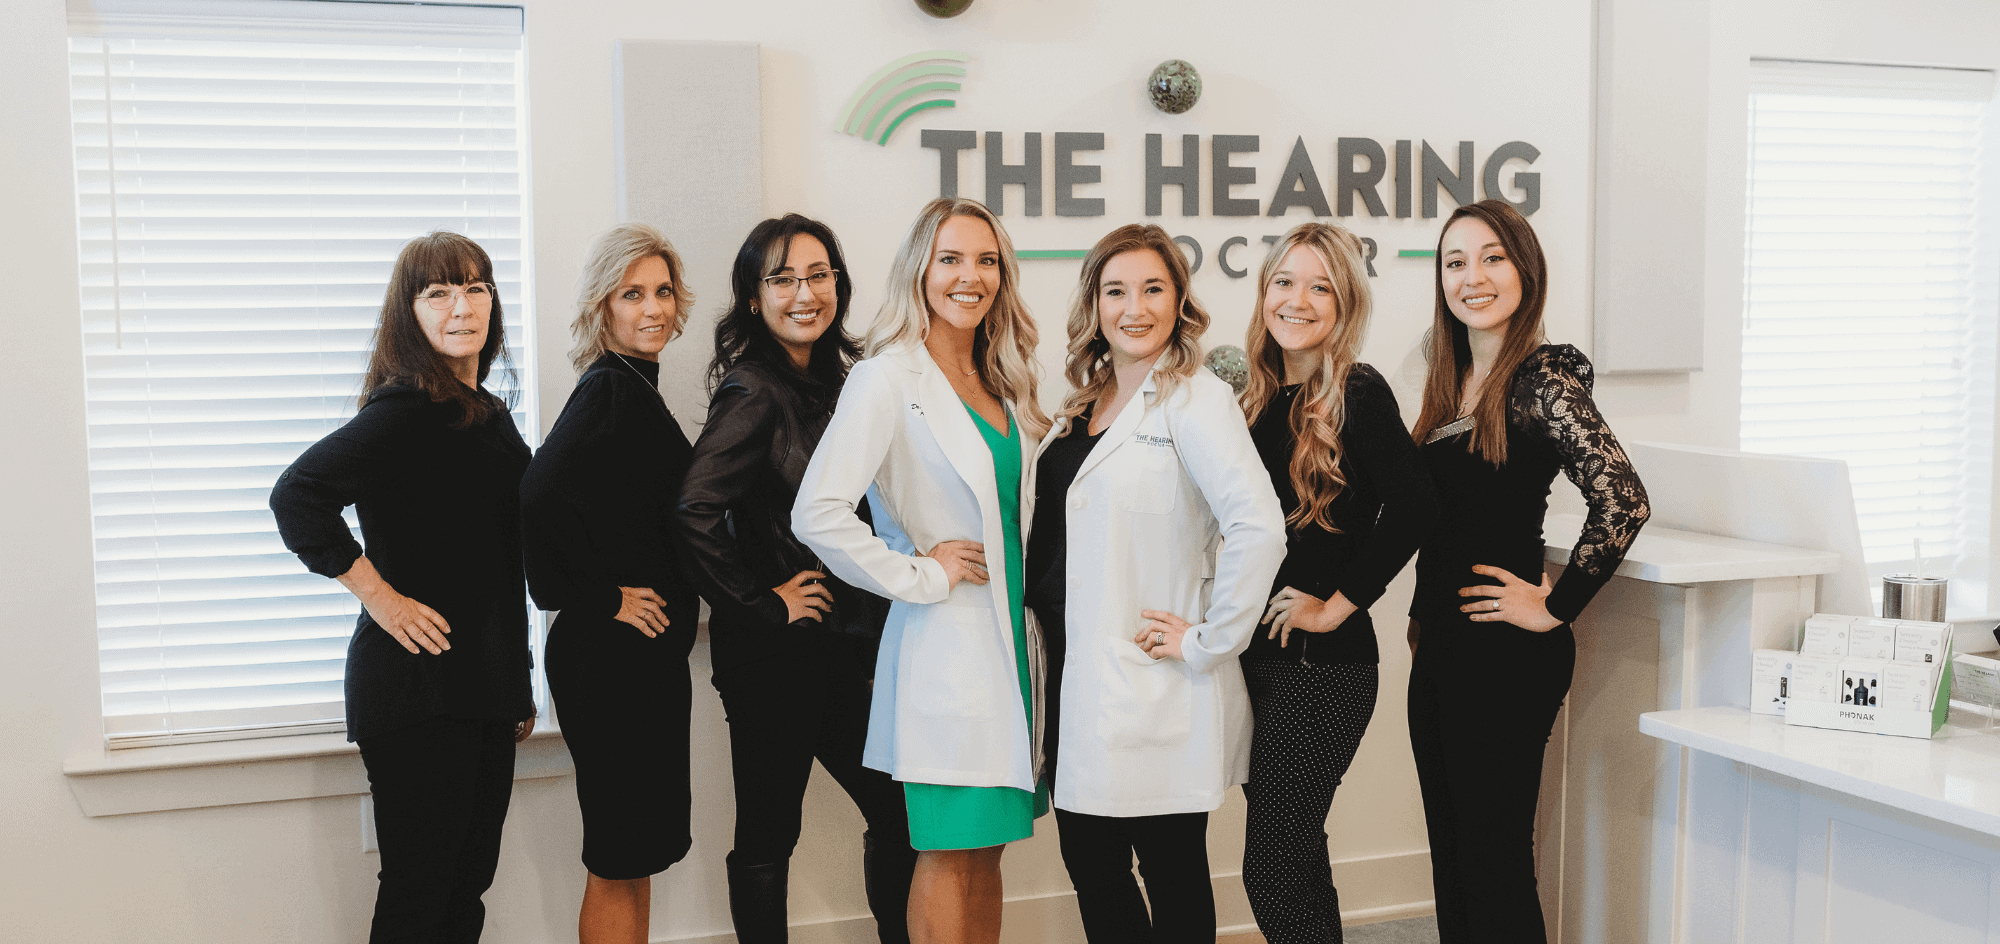 Audiology Clinic | Sample image of The Hearing Doctor clinic